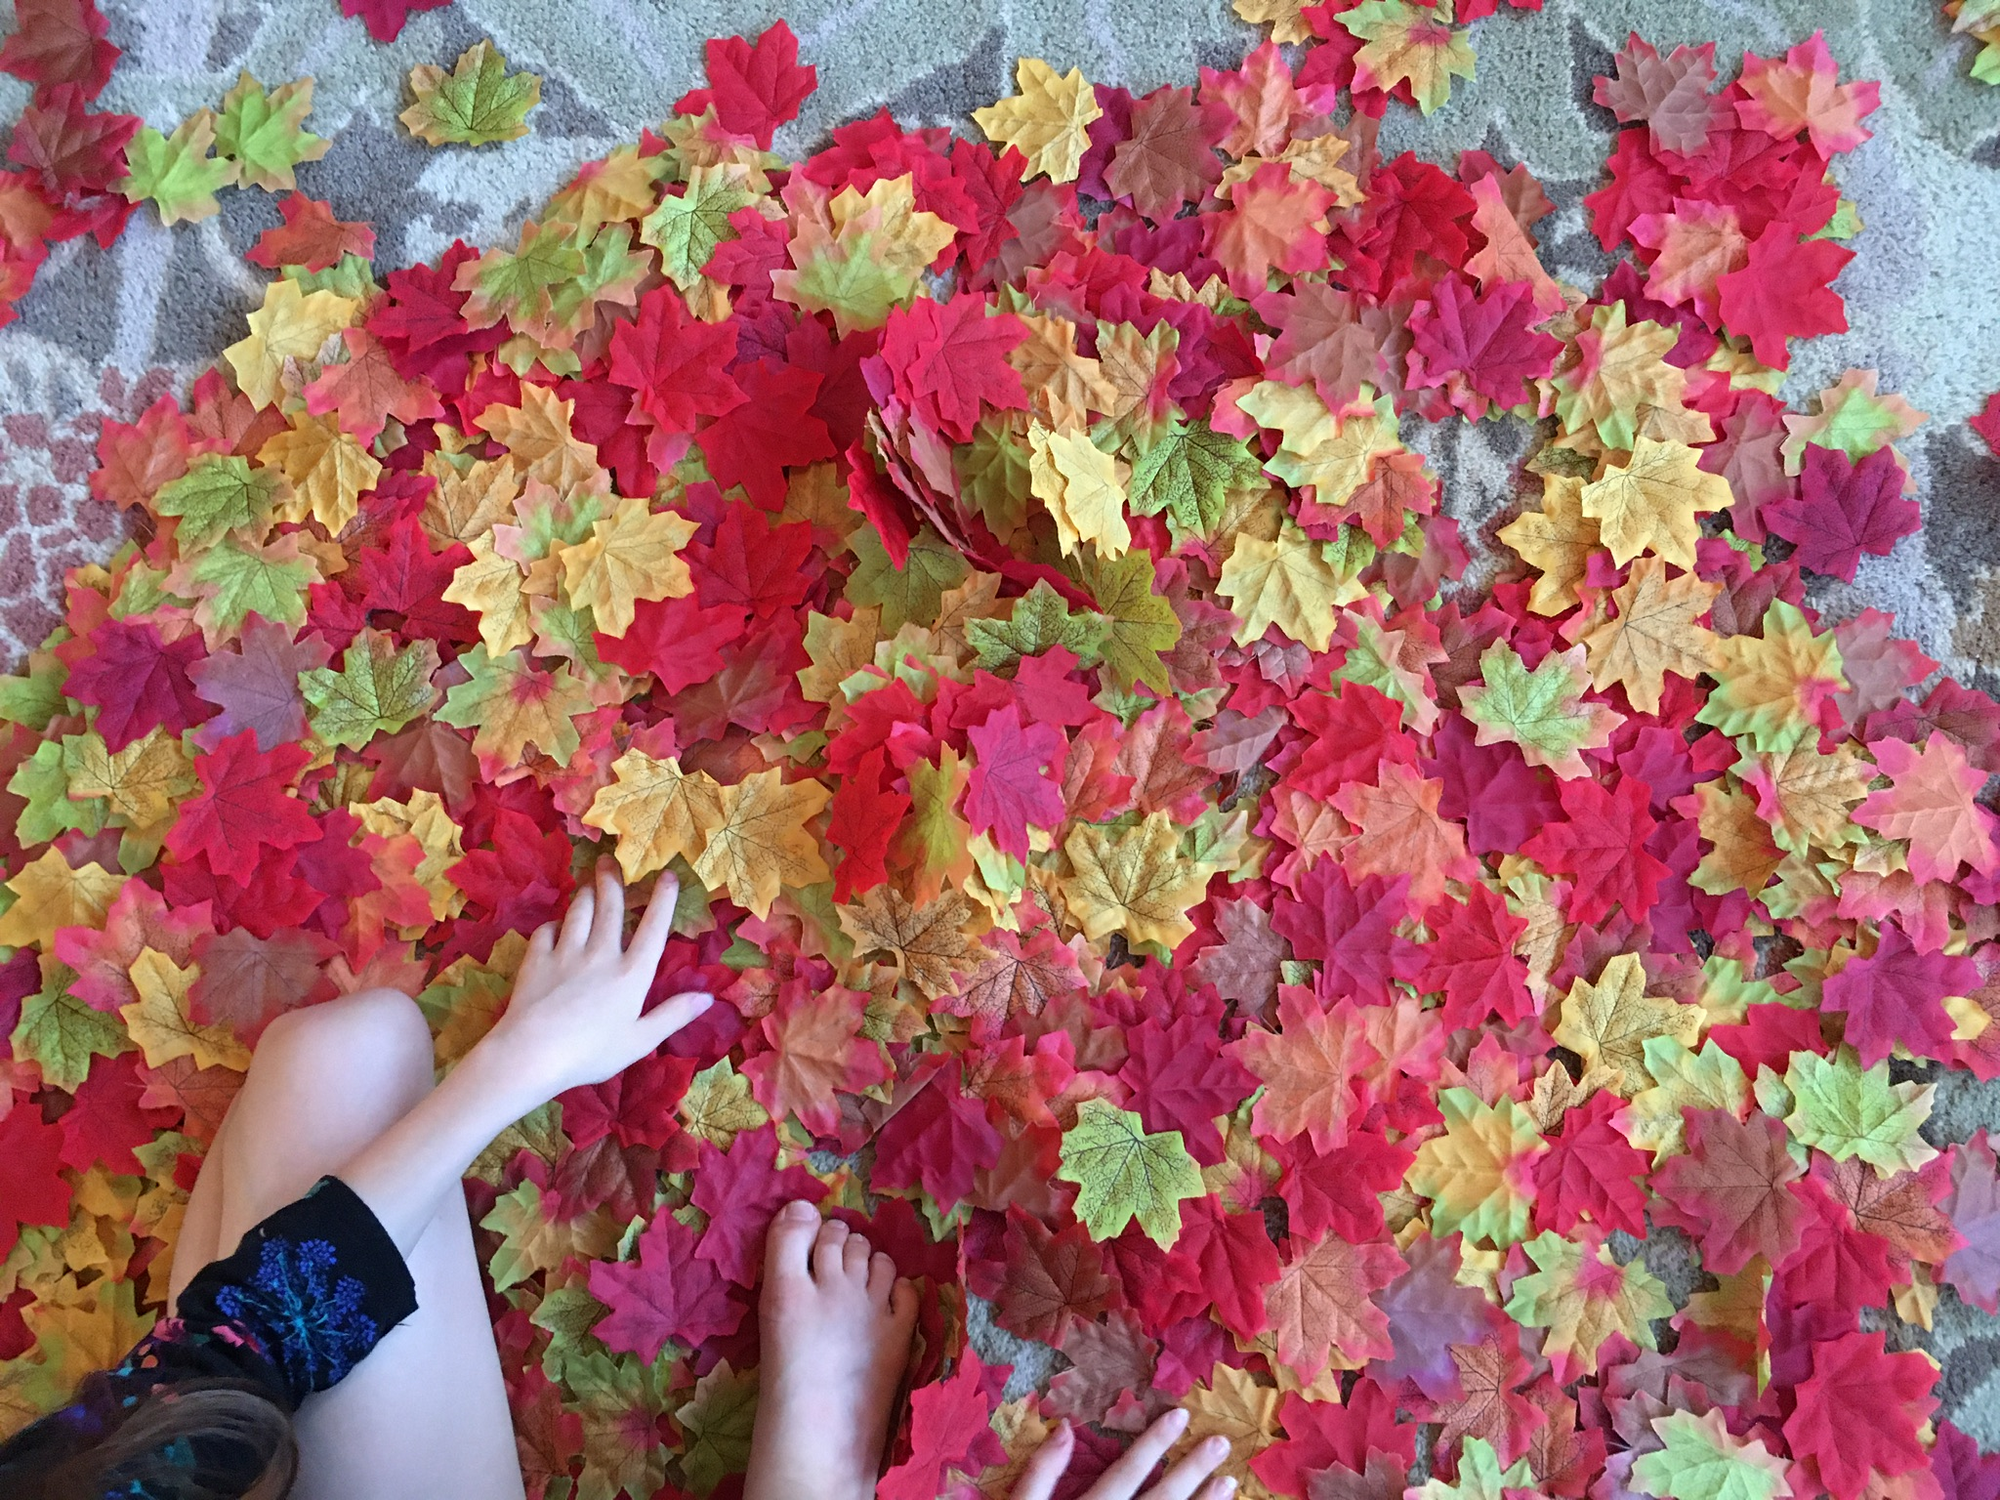 Fake fall maple leaves made of fabric in red, orange, yellow, green, and brown, in a pile.